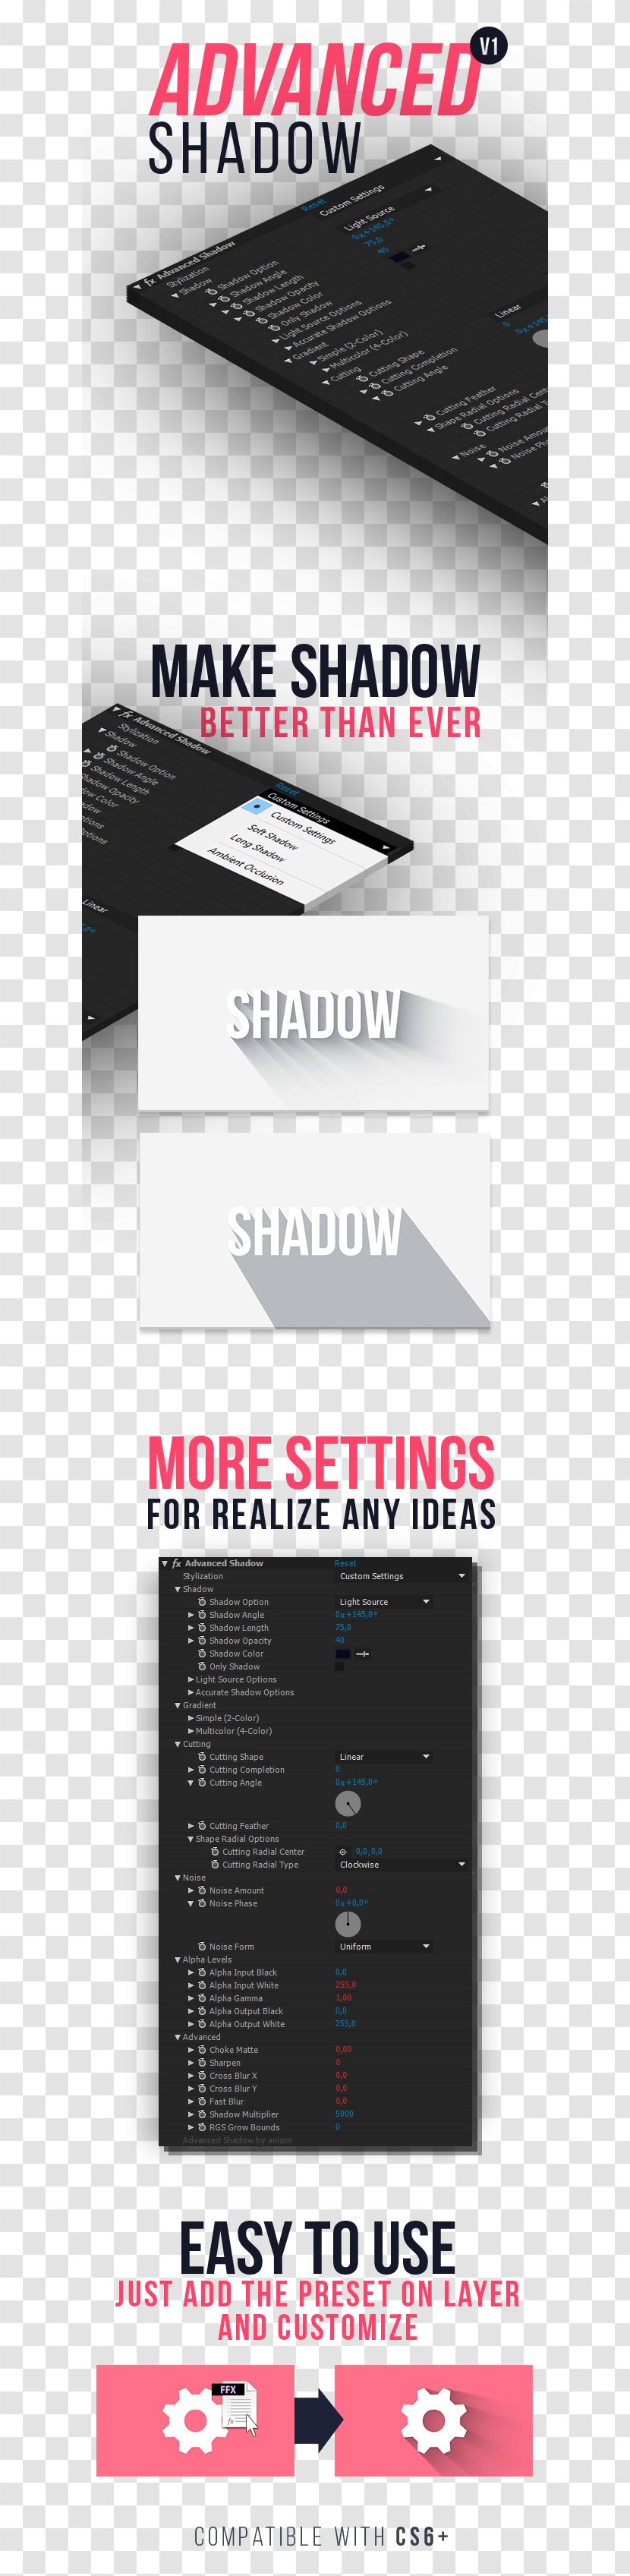 Adobe After Effects Shadow Plug-in Light MacOS - Logo Transparent PNG